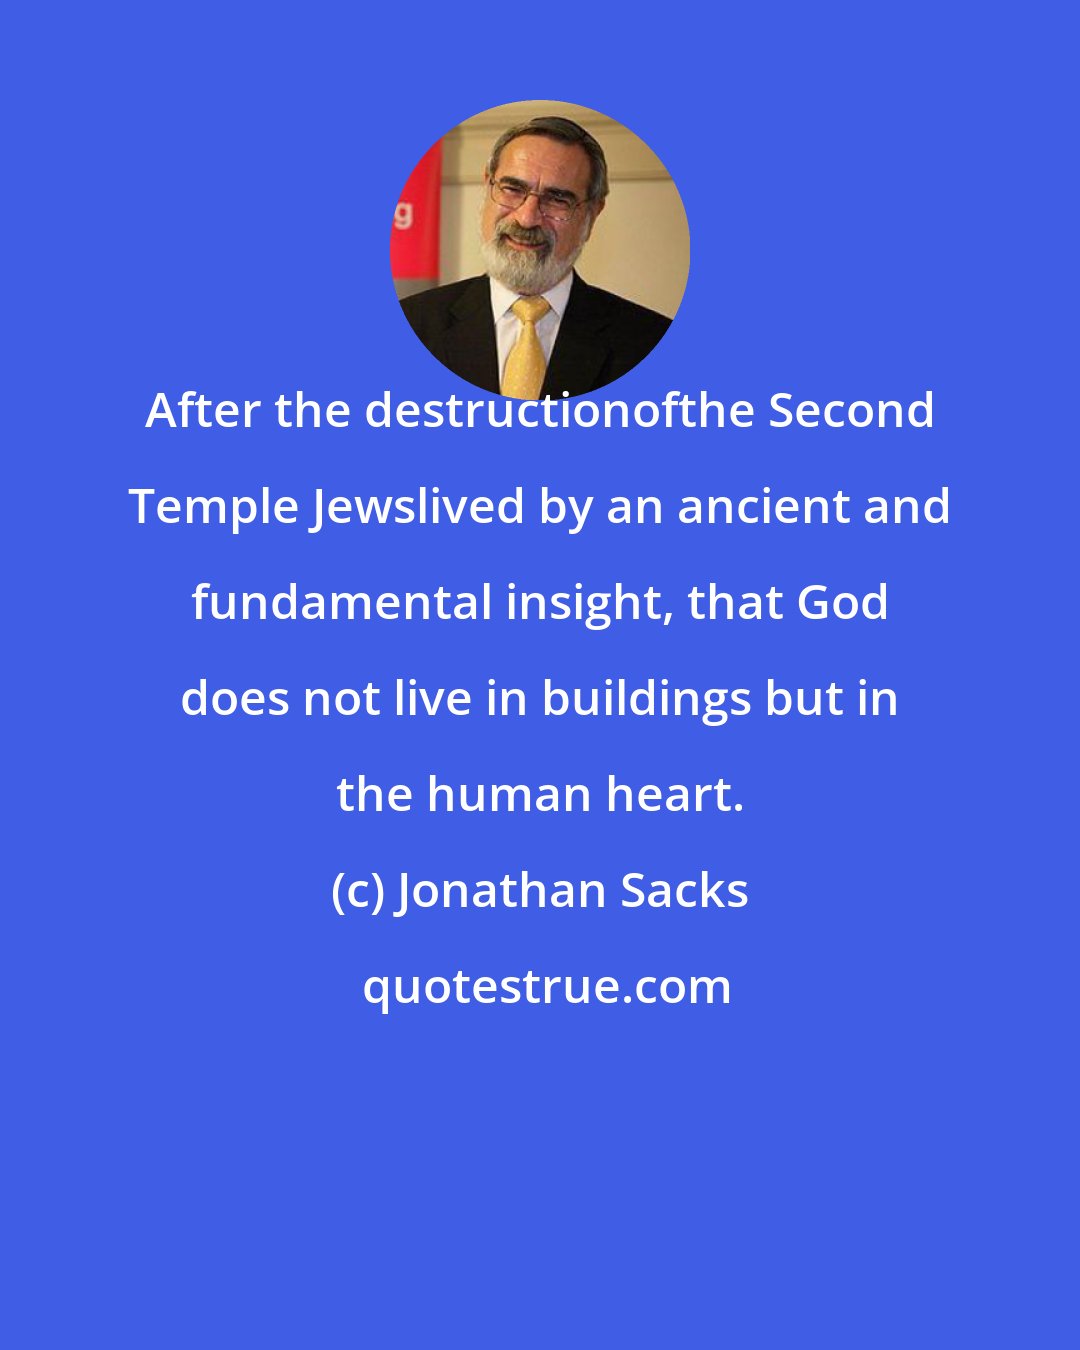 Jonathan Sacks: After the destructionofthe Second Temple Jewslived by an ancient and fundamental insight, that God does not live in buildings but in the human heart.